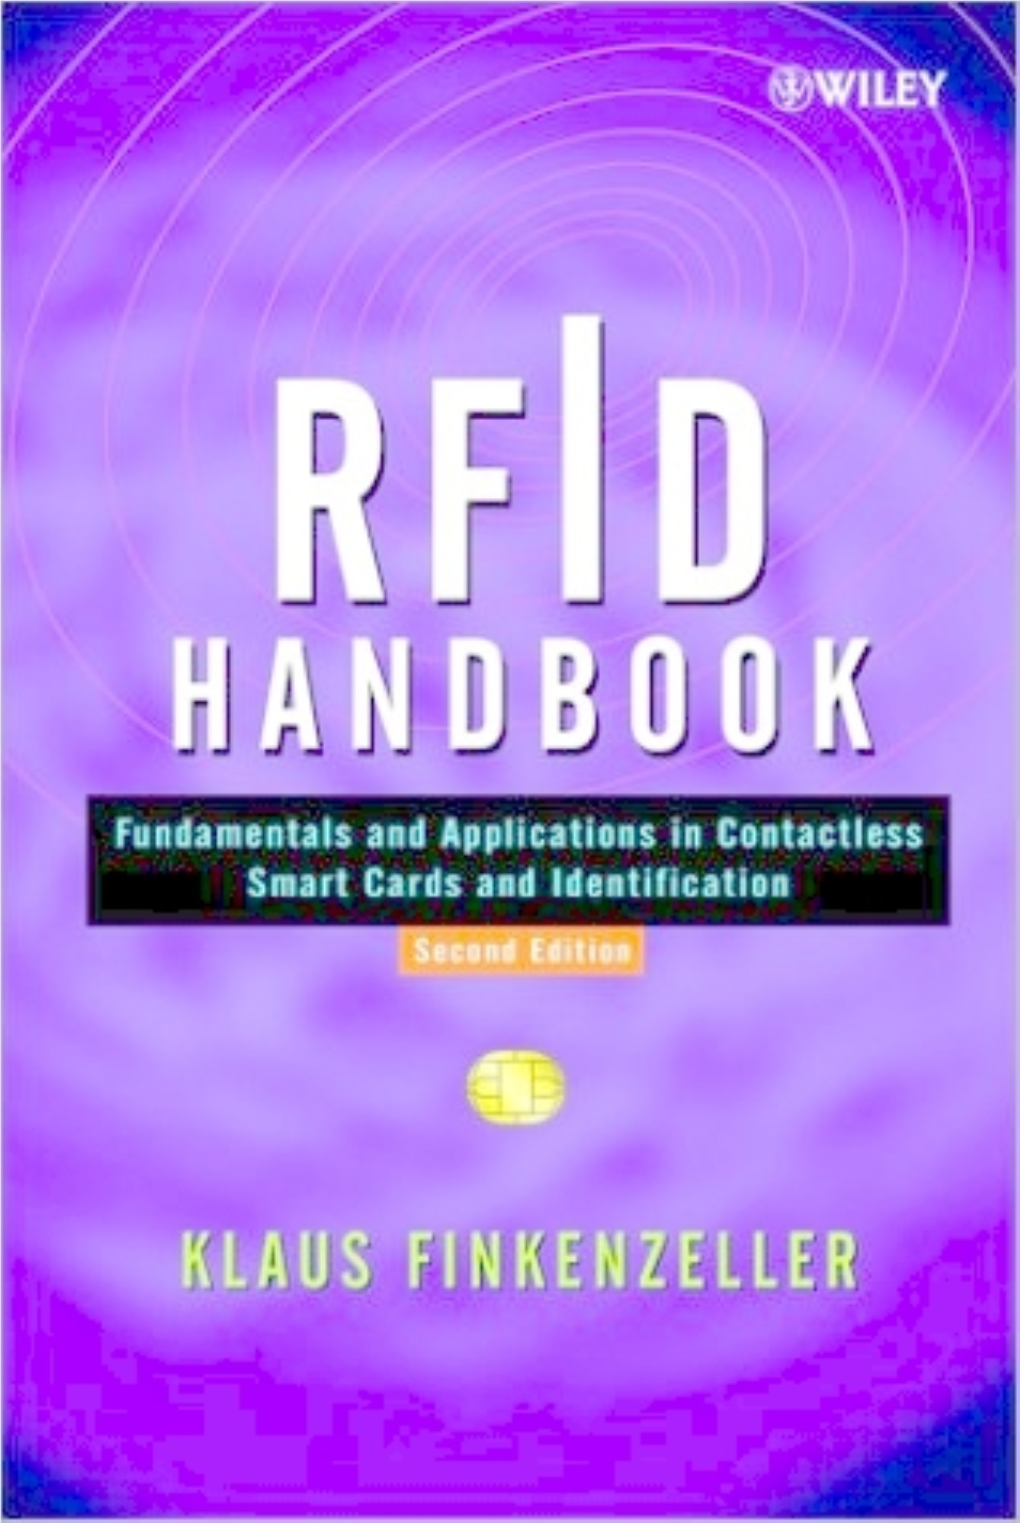 4 Physical Principles of RFID Systems